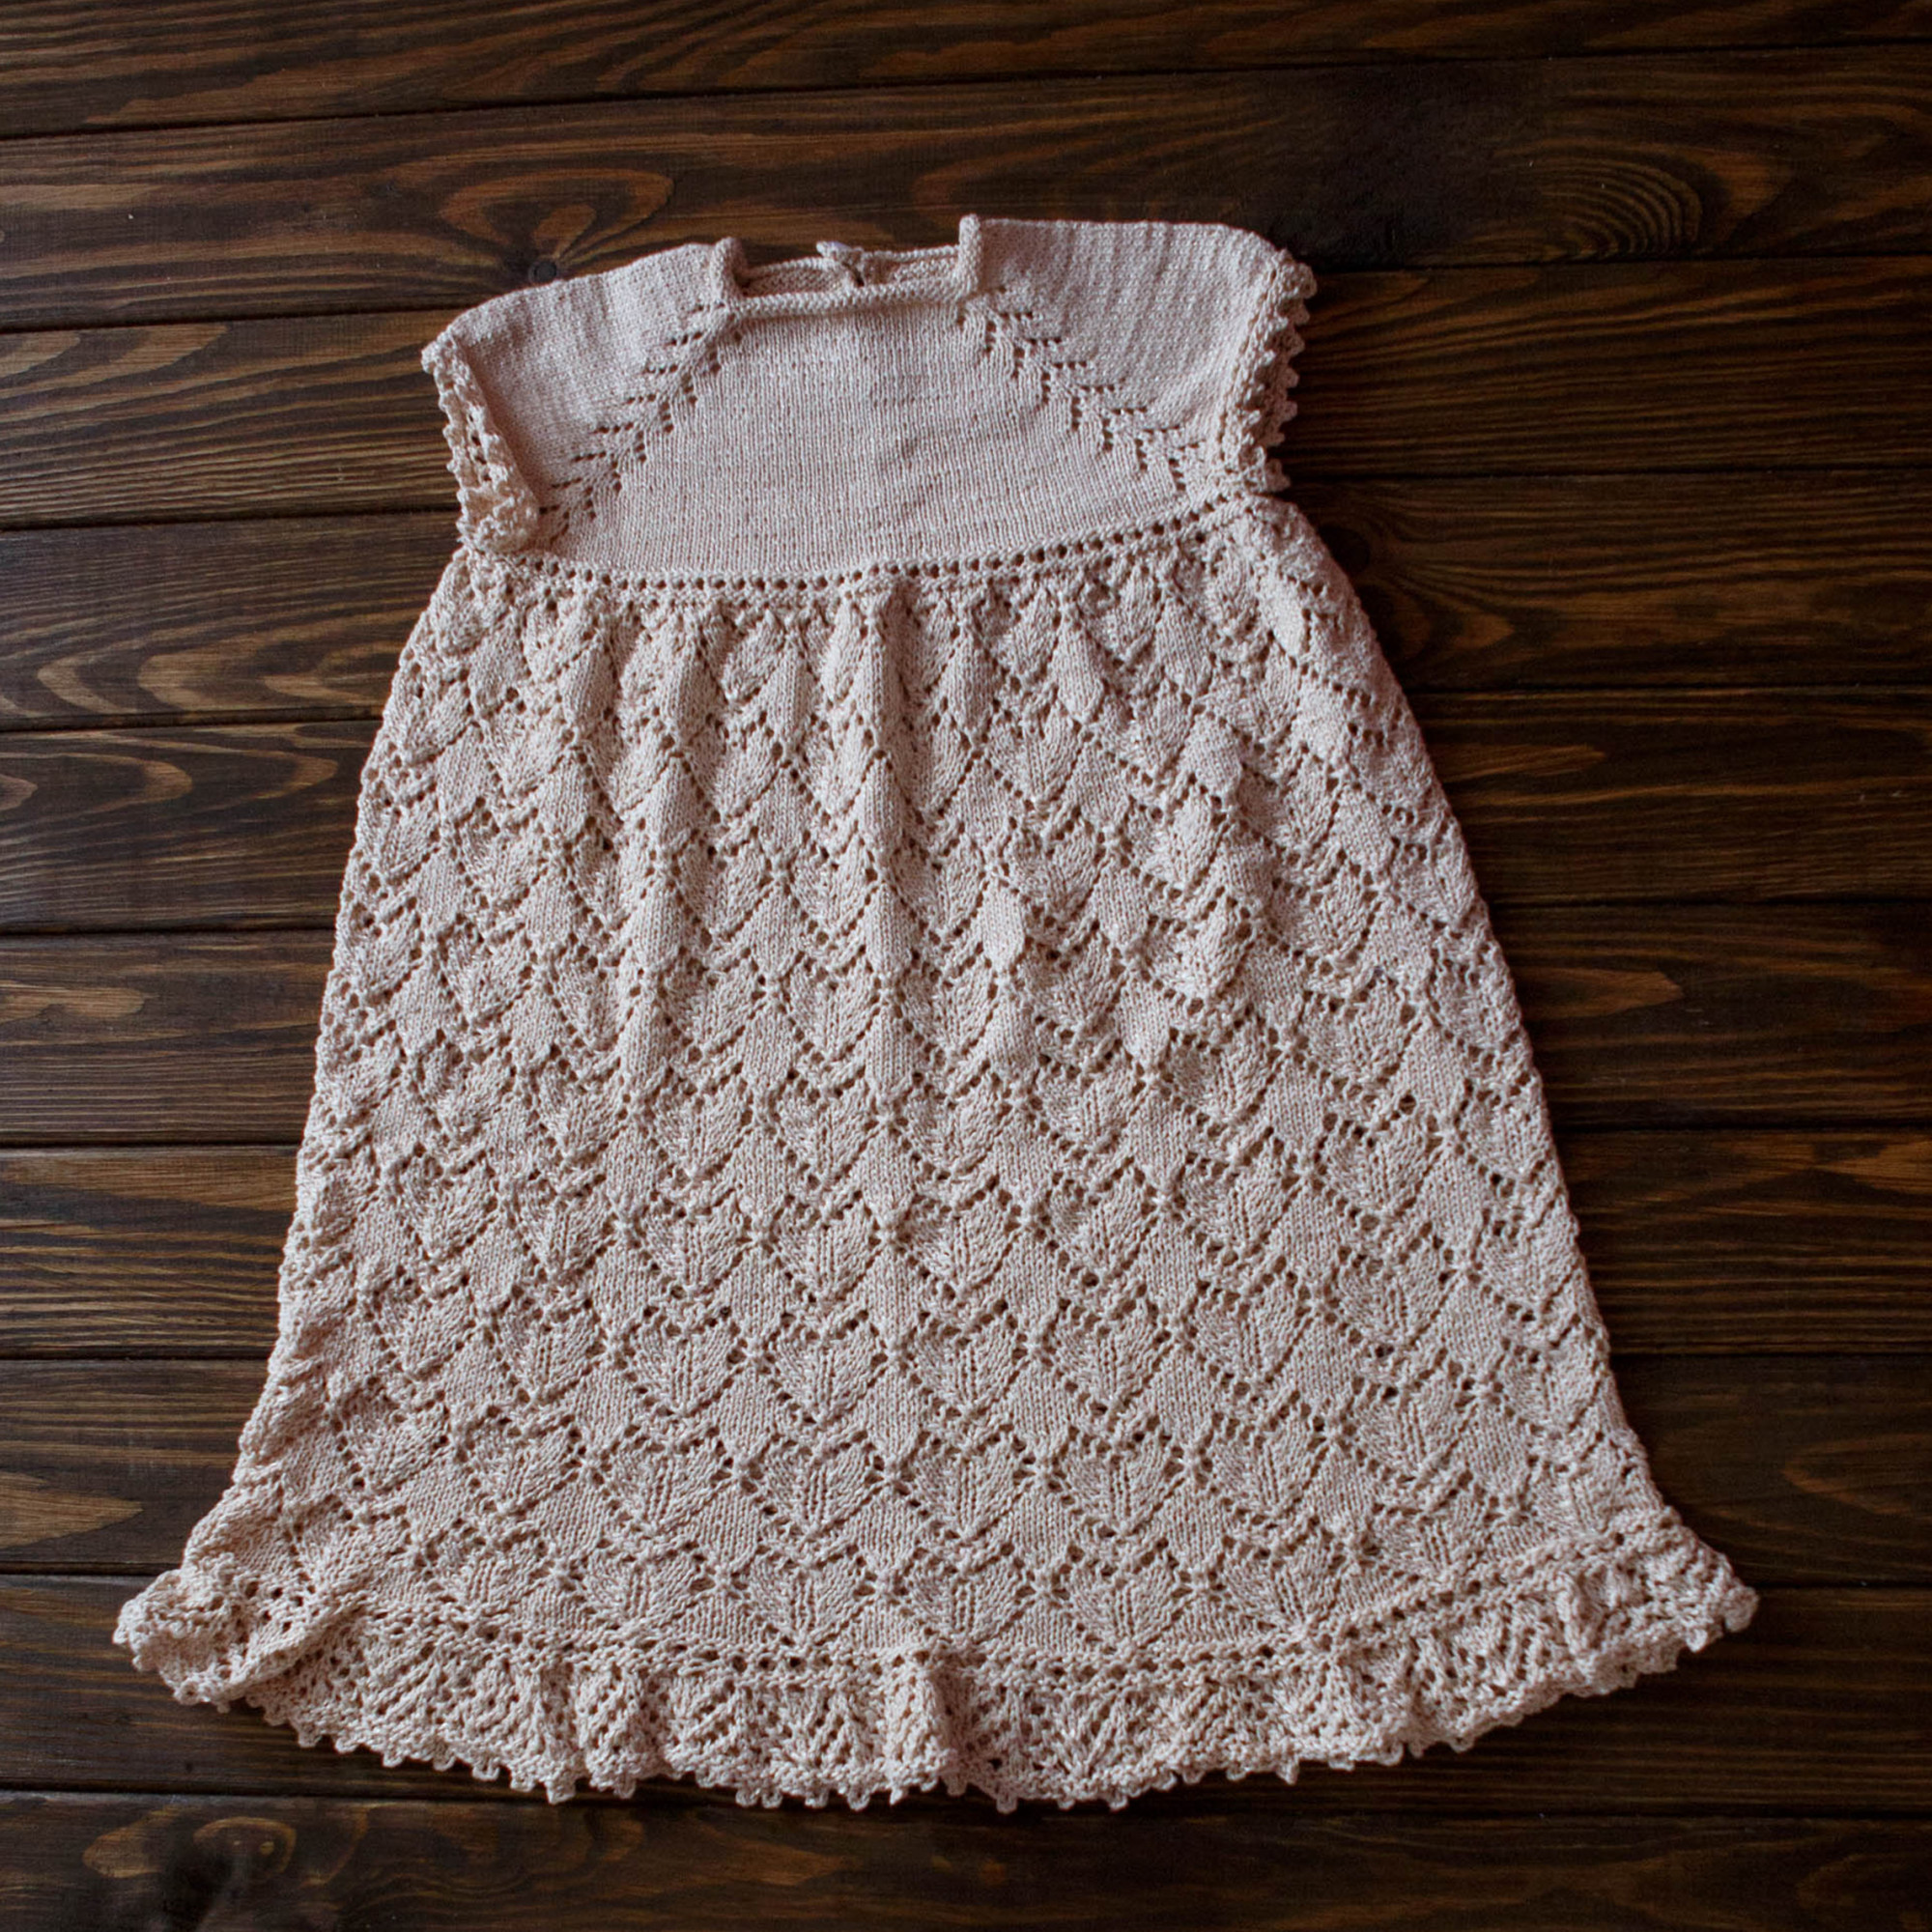 Hand Knitted Elegant Baby Girl Dress, Pattern Hearts, Seamless